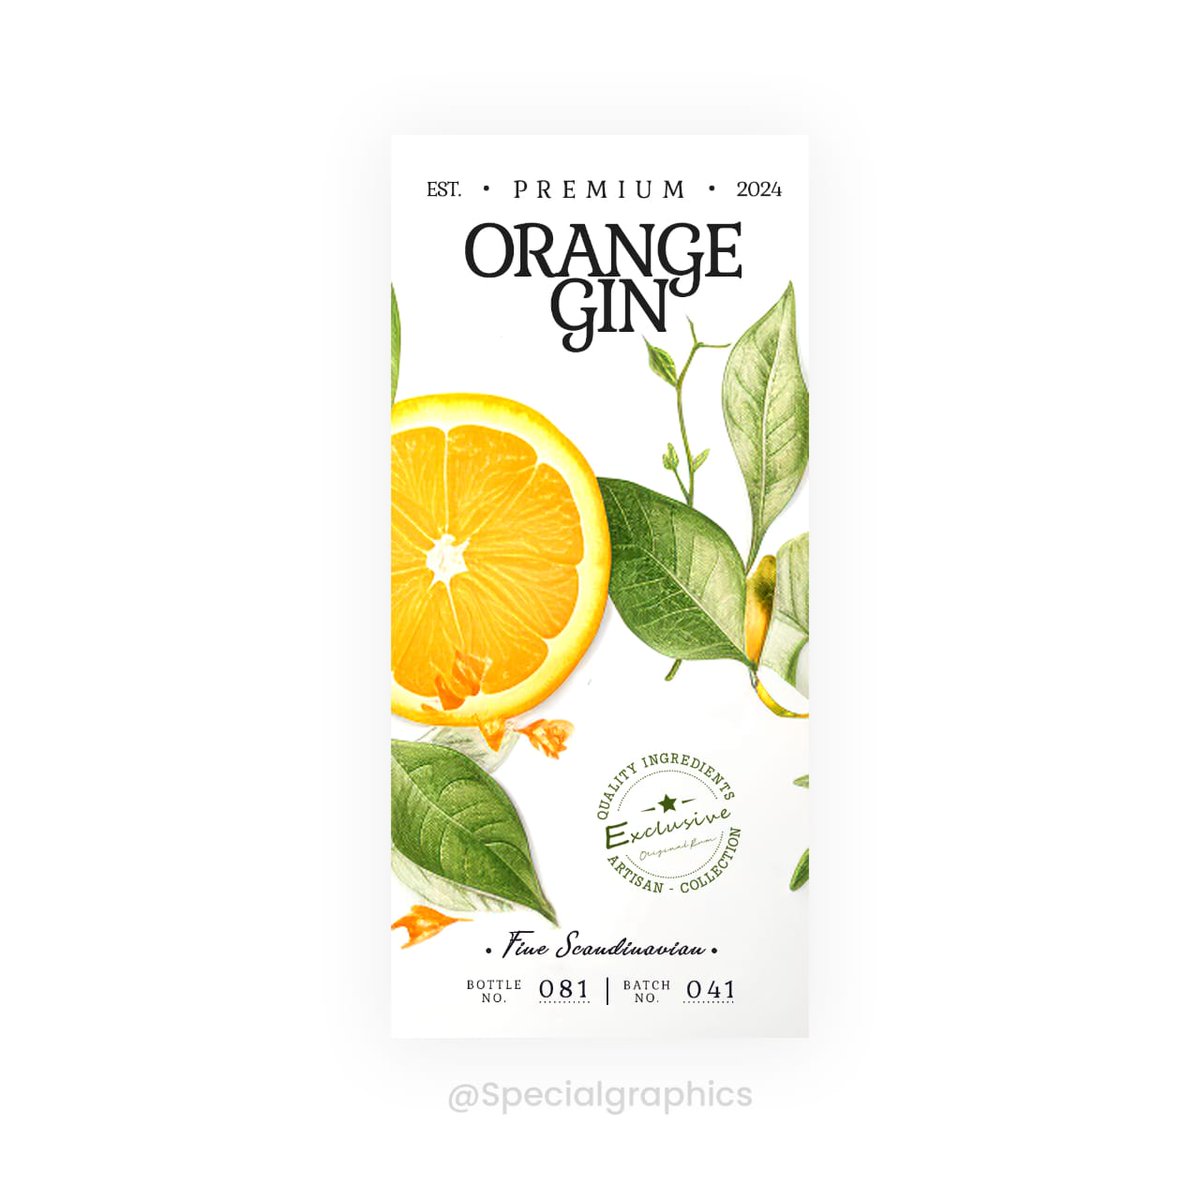 Orange Gin label crafted by Special Graphics!  Our designers have imbued this label with elegance, capturing the essence of sophistication.
 ——
#SpecialGraphics #OrangeGinLabel #ElegantDesign #Craftsmanship #Sophisticated #GinLovers #LabelDesign